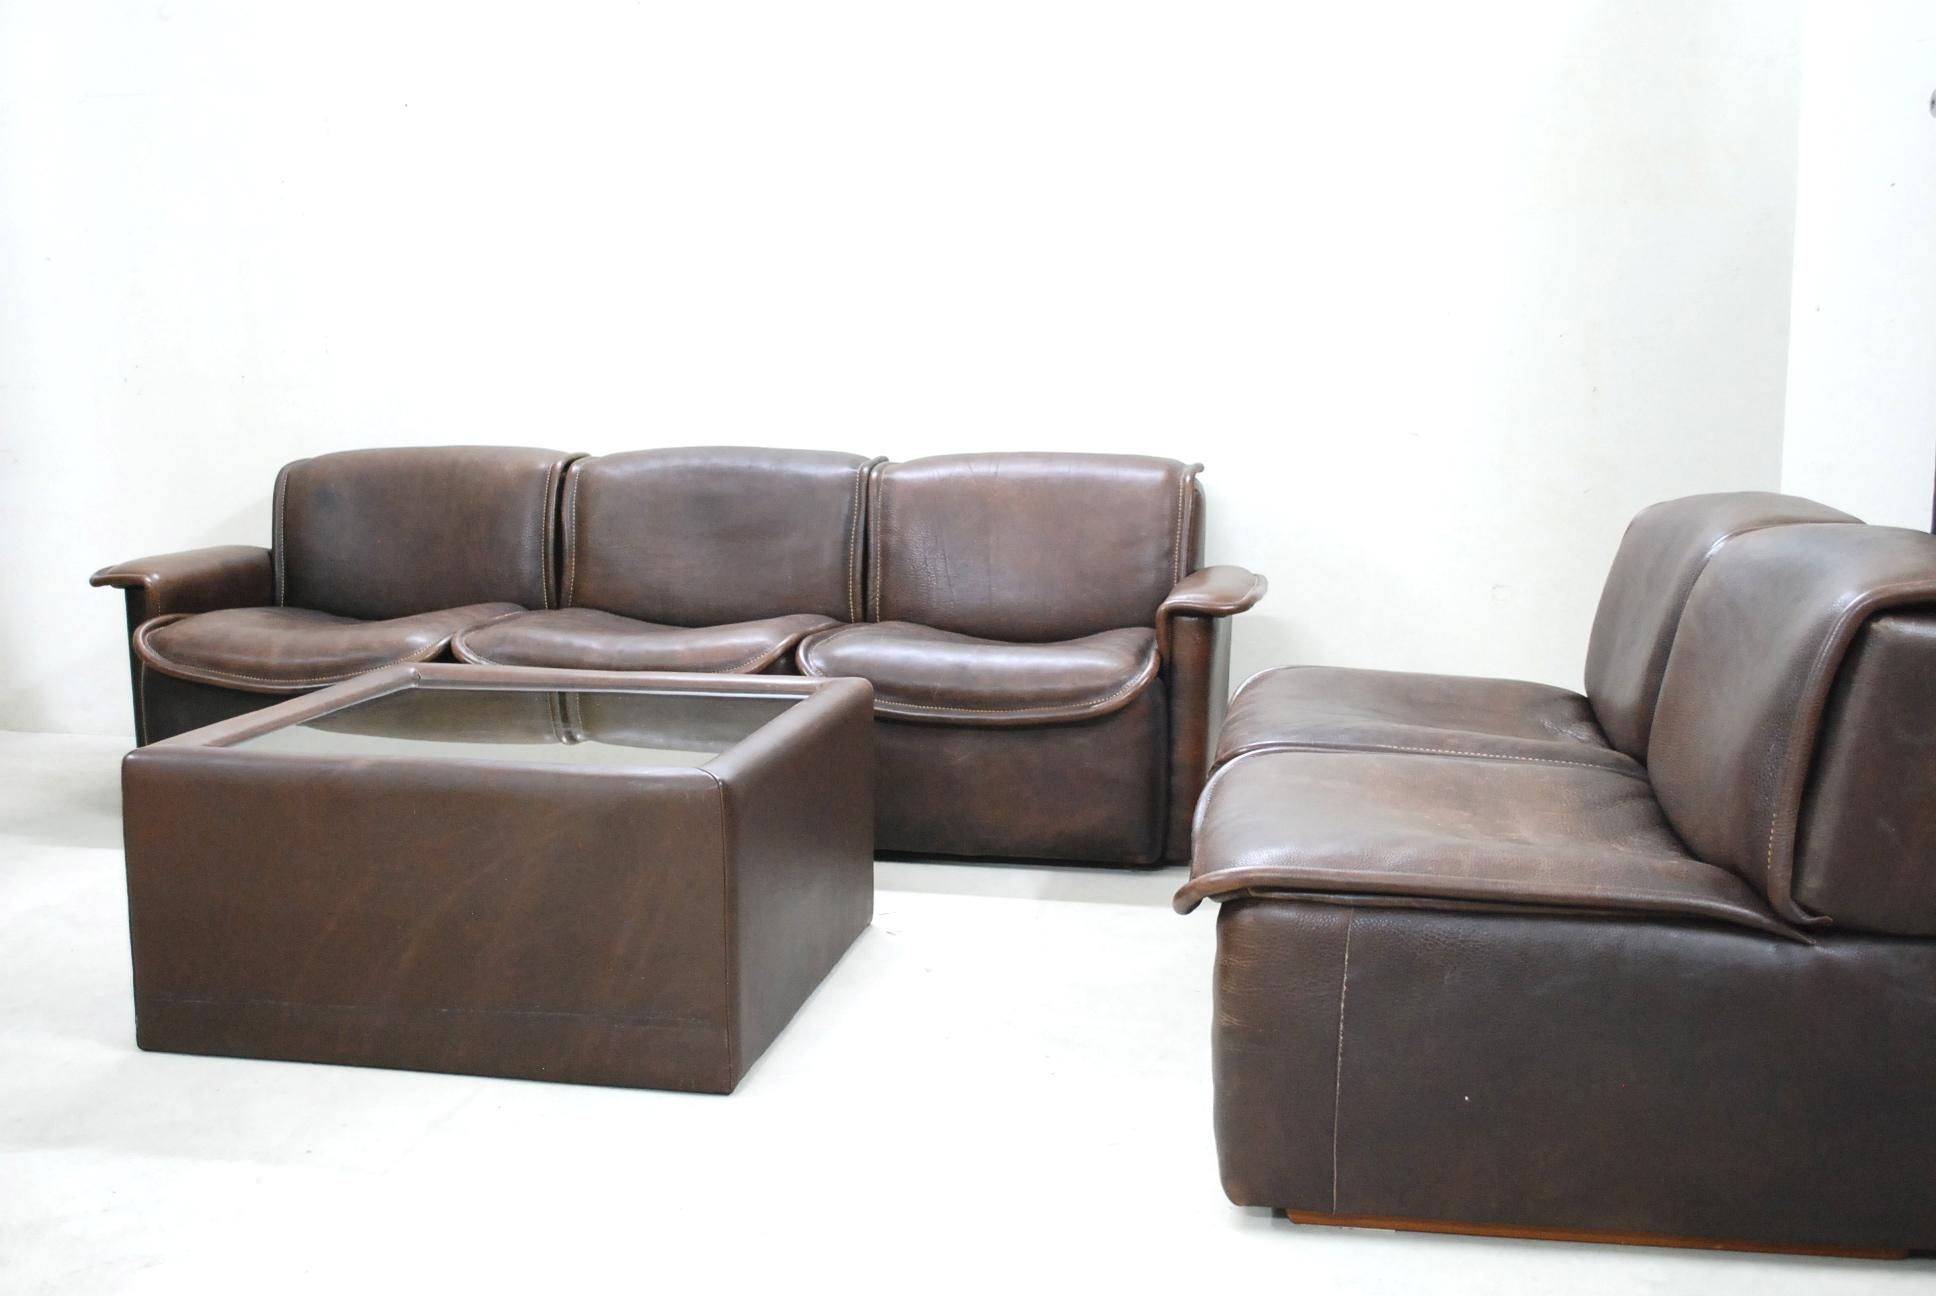 De Sede DS 12 Modular Vintage Neck Leather Sofa Brown and Coffee Table In Good Condition For Sale In Munich, Bavaria